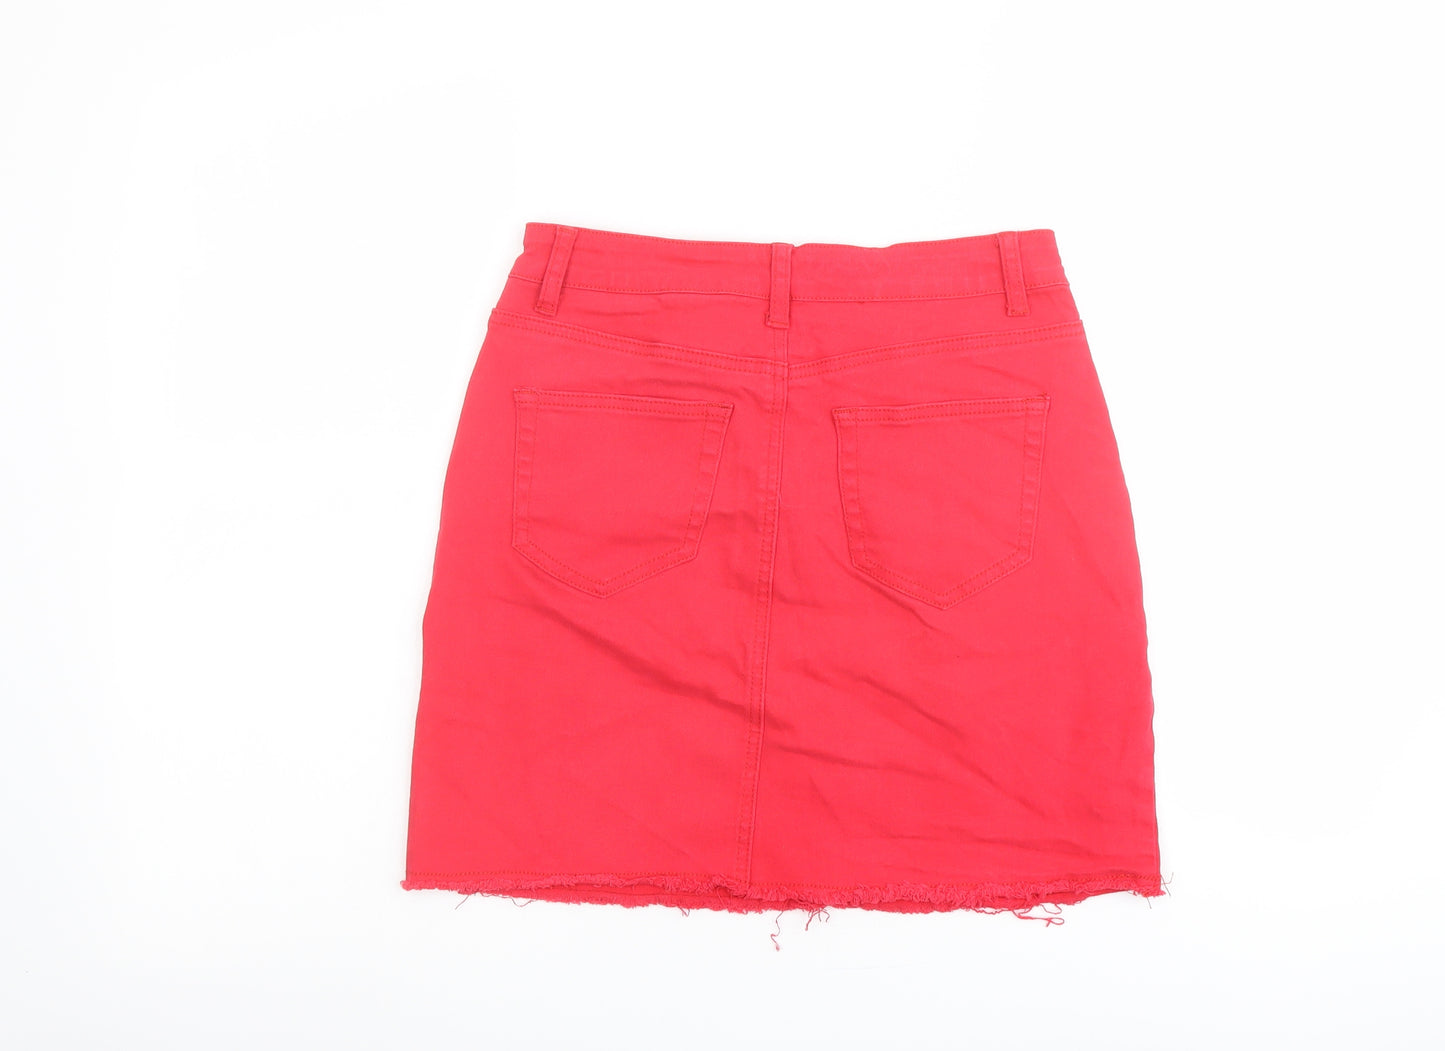 PRETTYLITTLETHING Womens Red Cotton A-Line Skirt Size 8 Button - Distressed Raw Hem